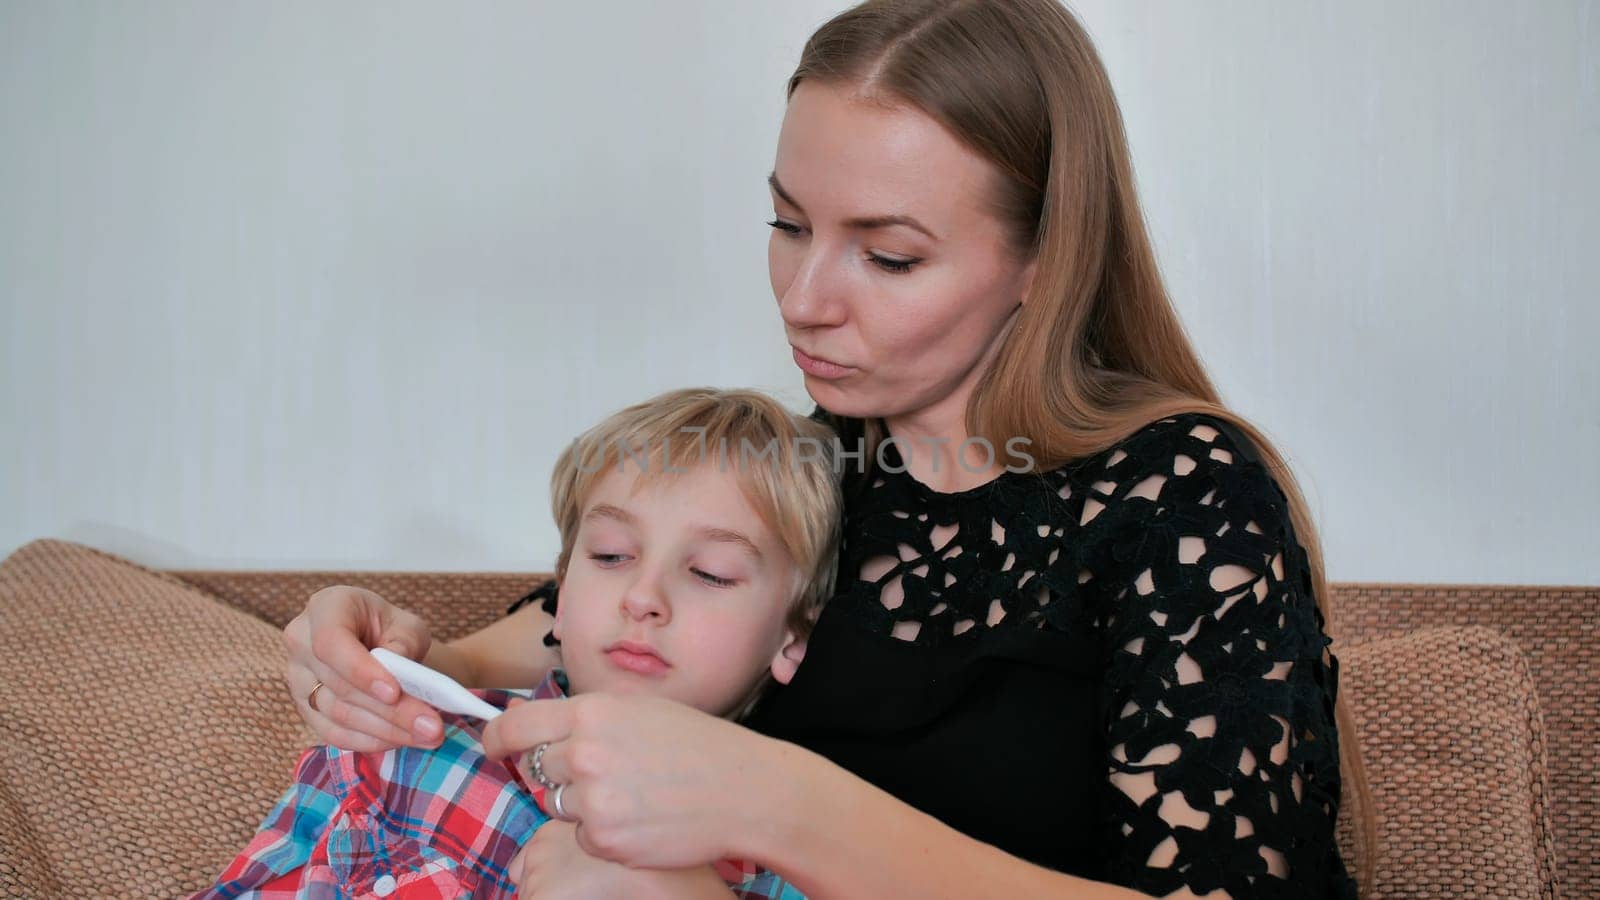 A caring mother measures the temperature of her son with a thermometer. by DovidPro